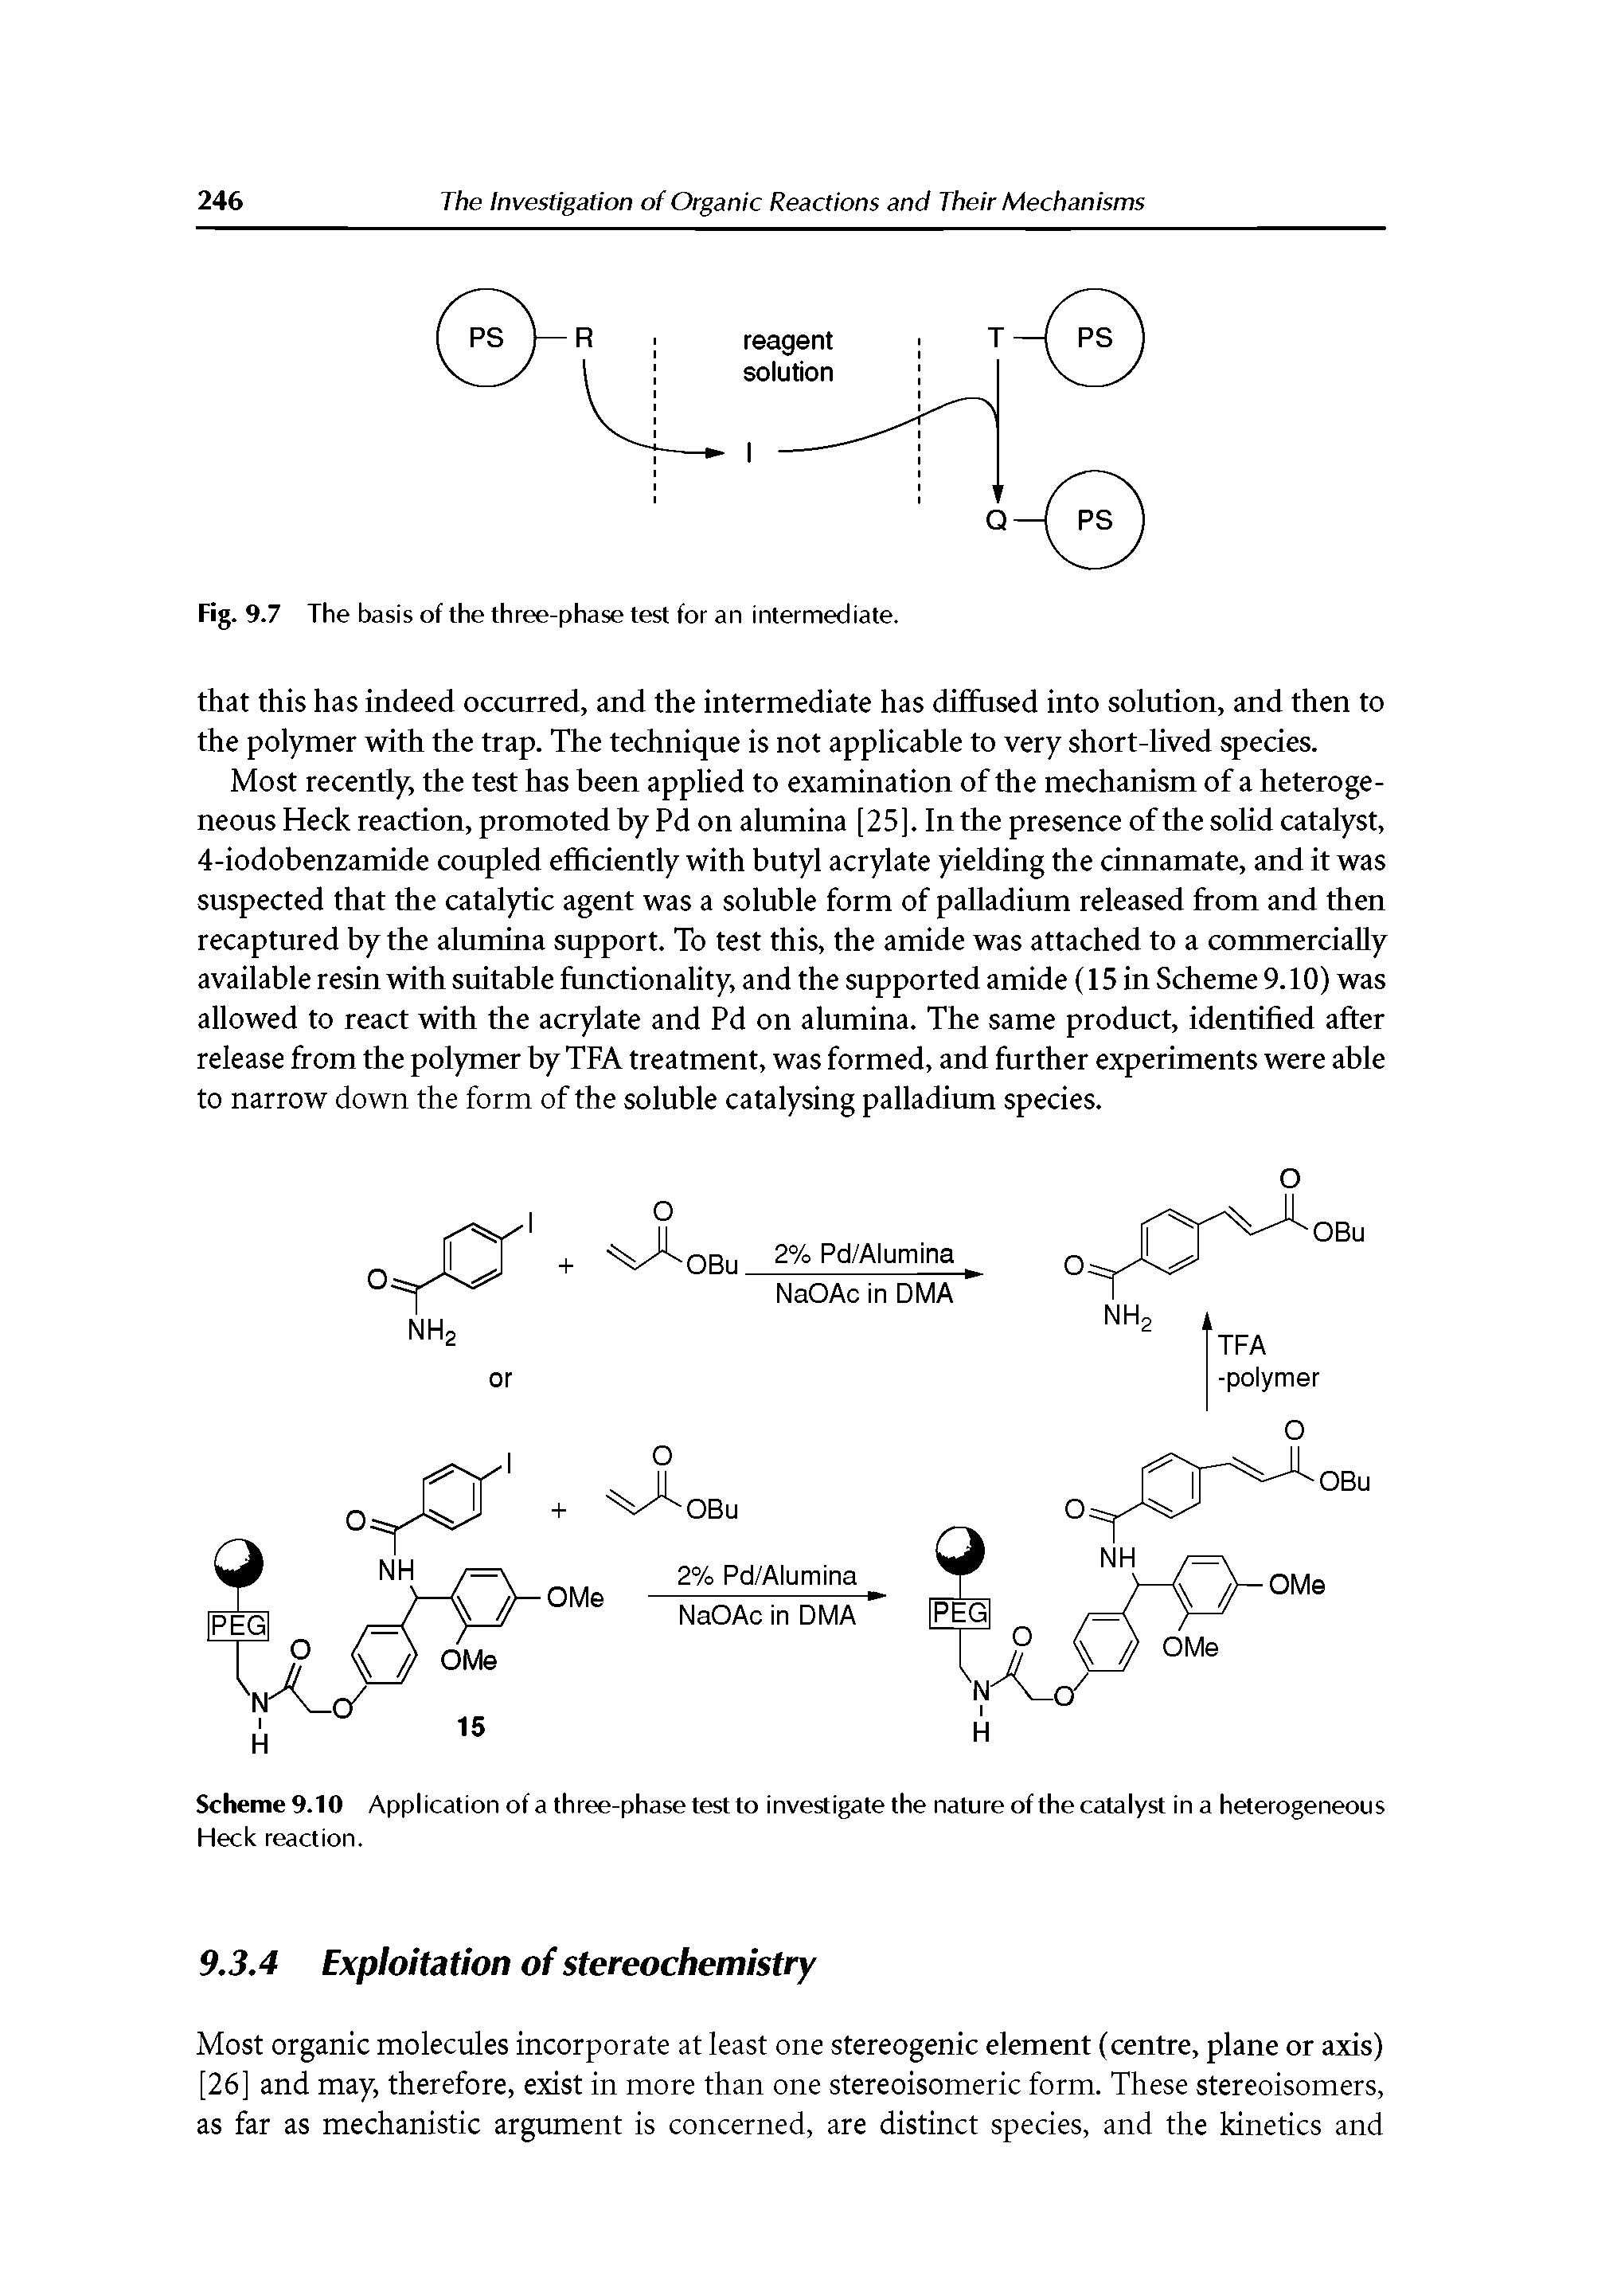 Scheme 9.10 Application of a three-phase test to investigate the nature of the catalyst in a heterogeneous Heck reaction.